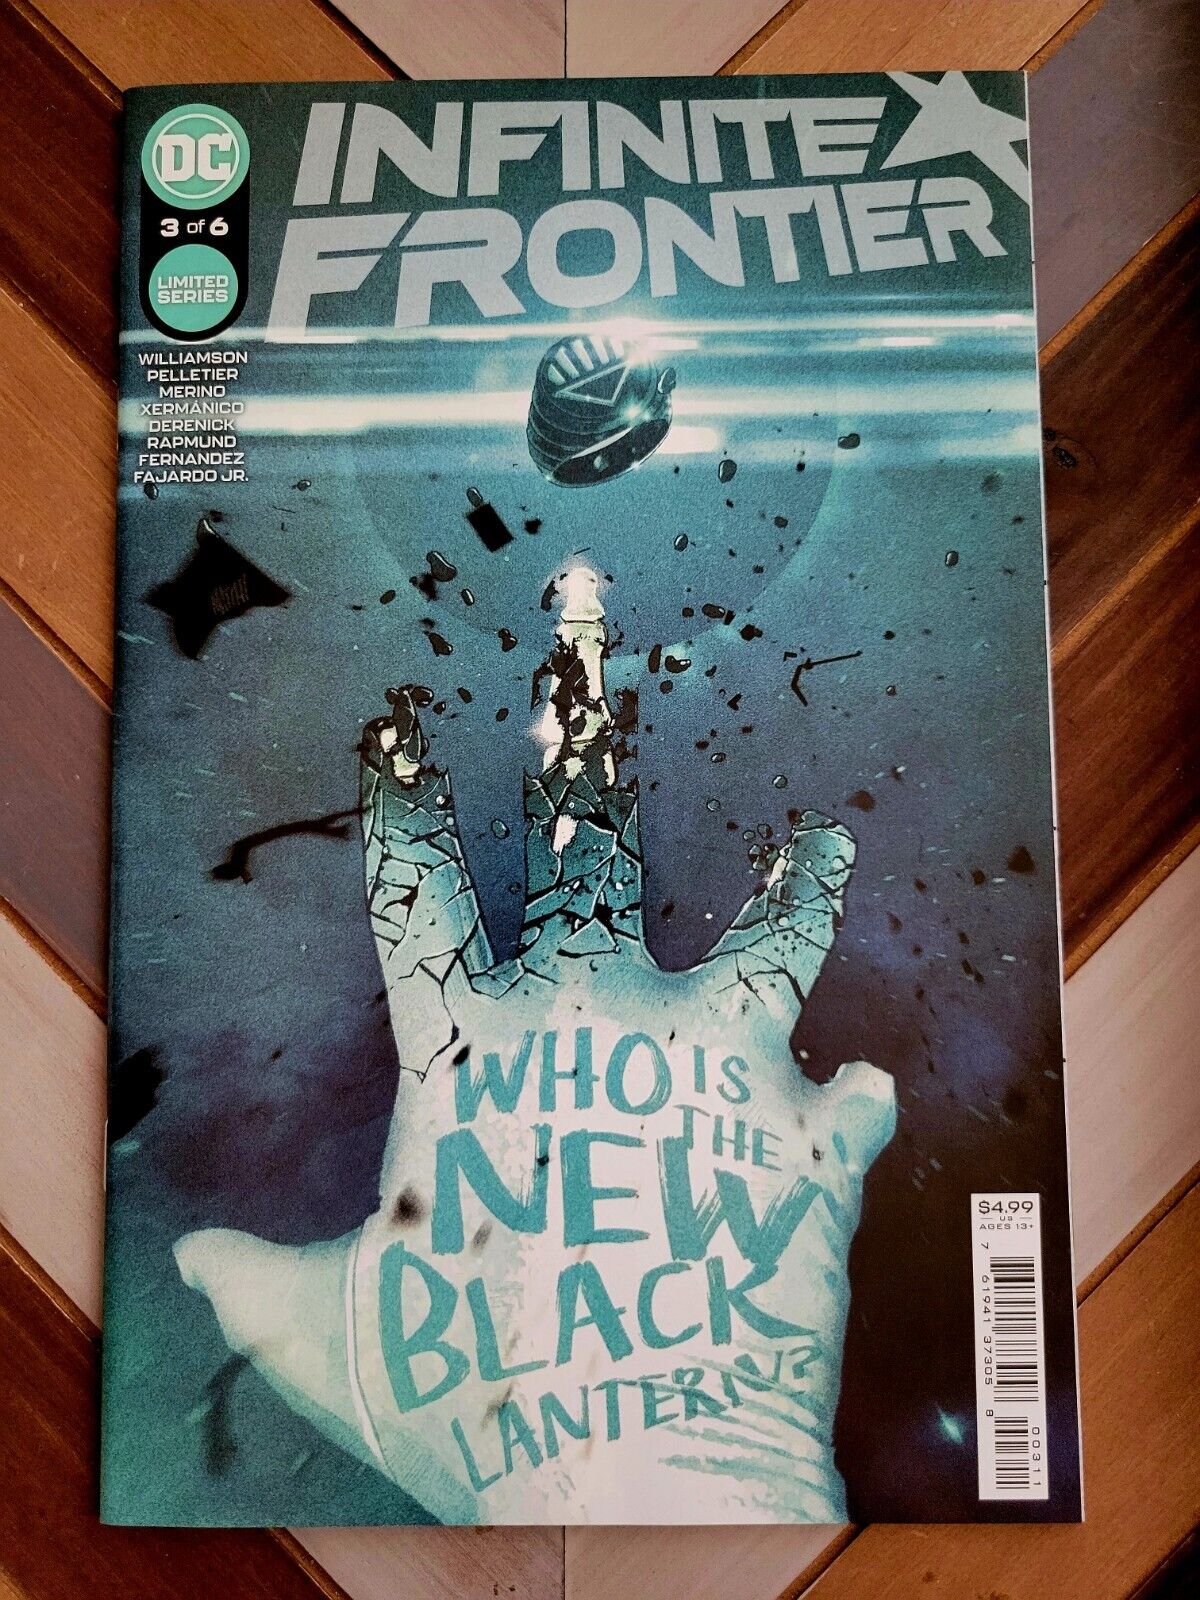 Infinite Frontier #3 (DC 2021) featuring The Flash, Psycho Pirate, Black Lantern